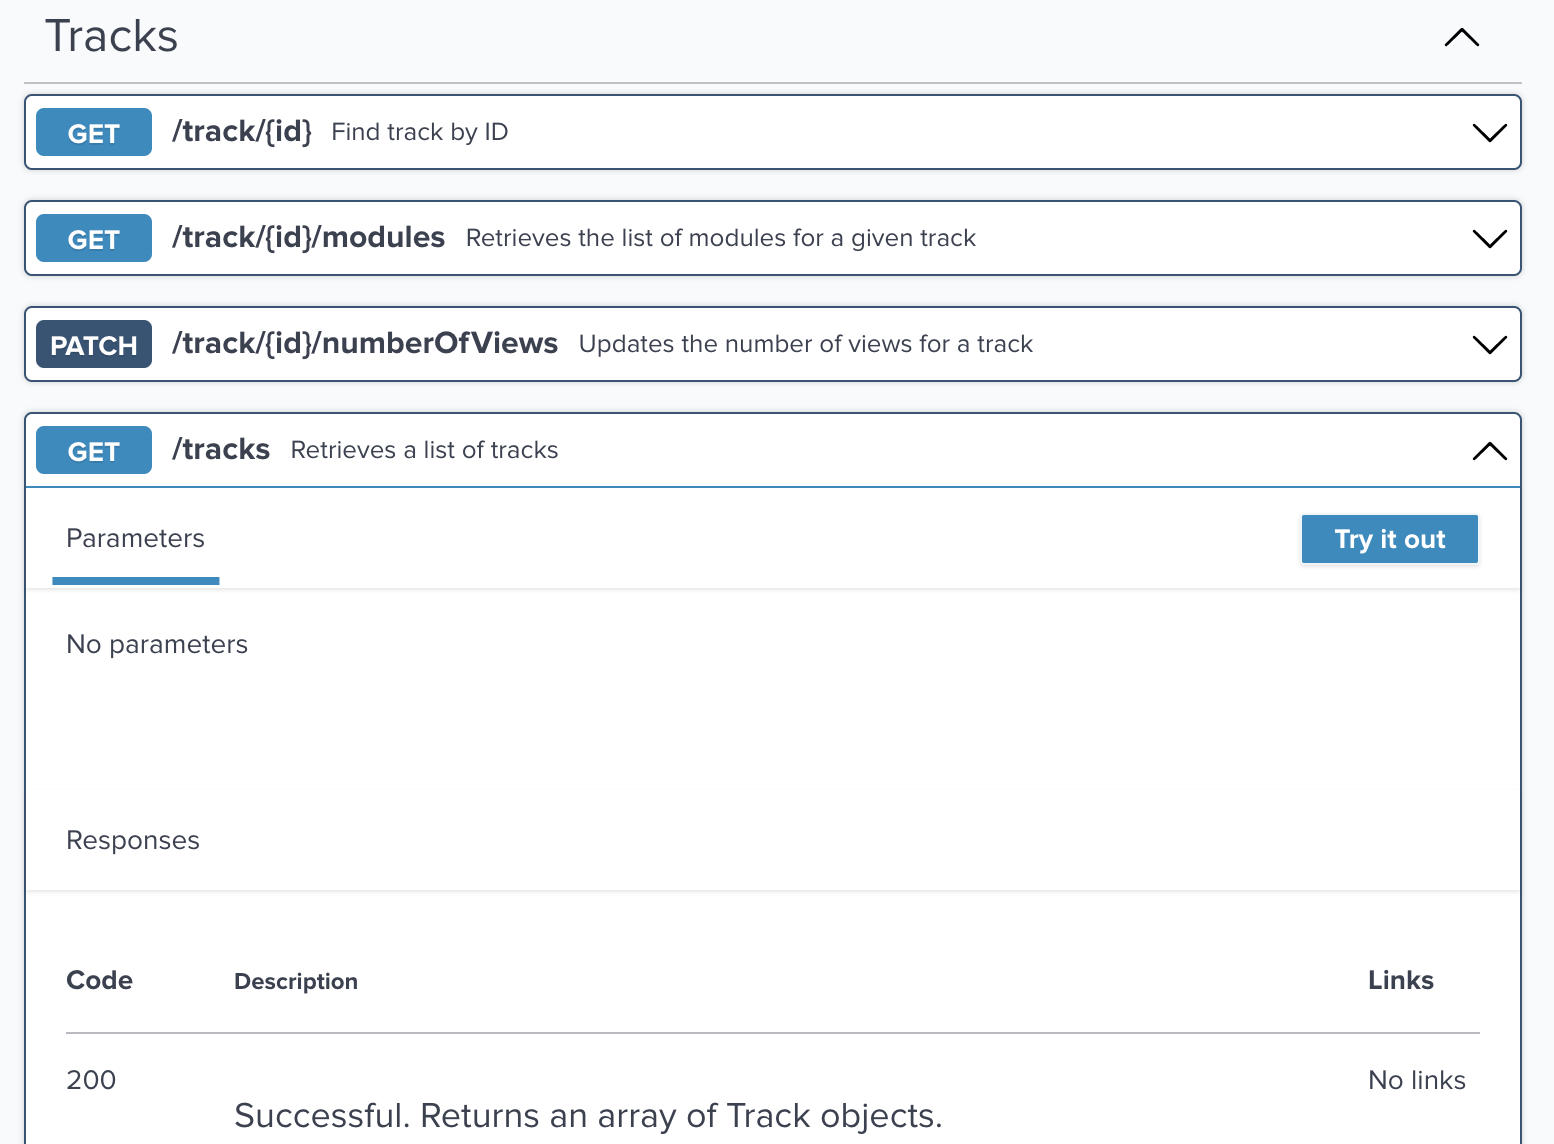 Figure: Screenshot of a Tracks OpenAPI doc with a Try it out button